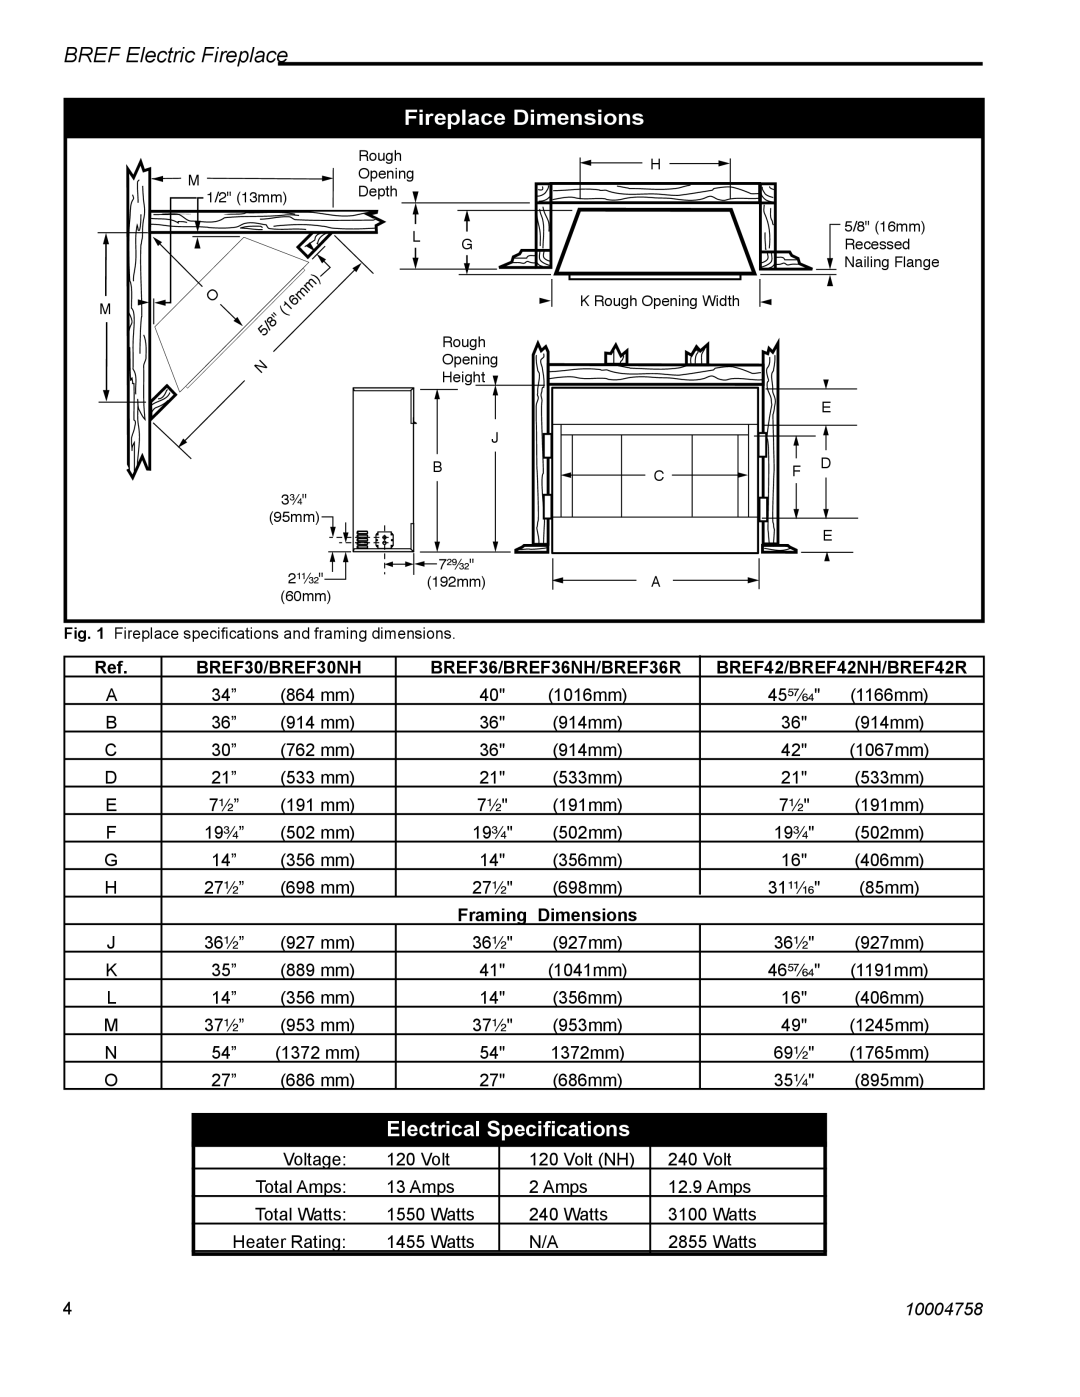 Vermont Casting BREF36R/42R manual Fireplace Dimensions, Electrical Speciﬁcations, BREF Electric Fireplace, BREF30/BREF30NH 